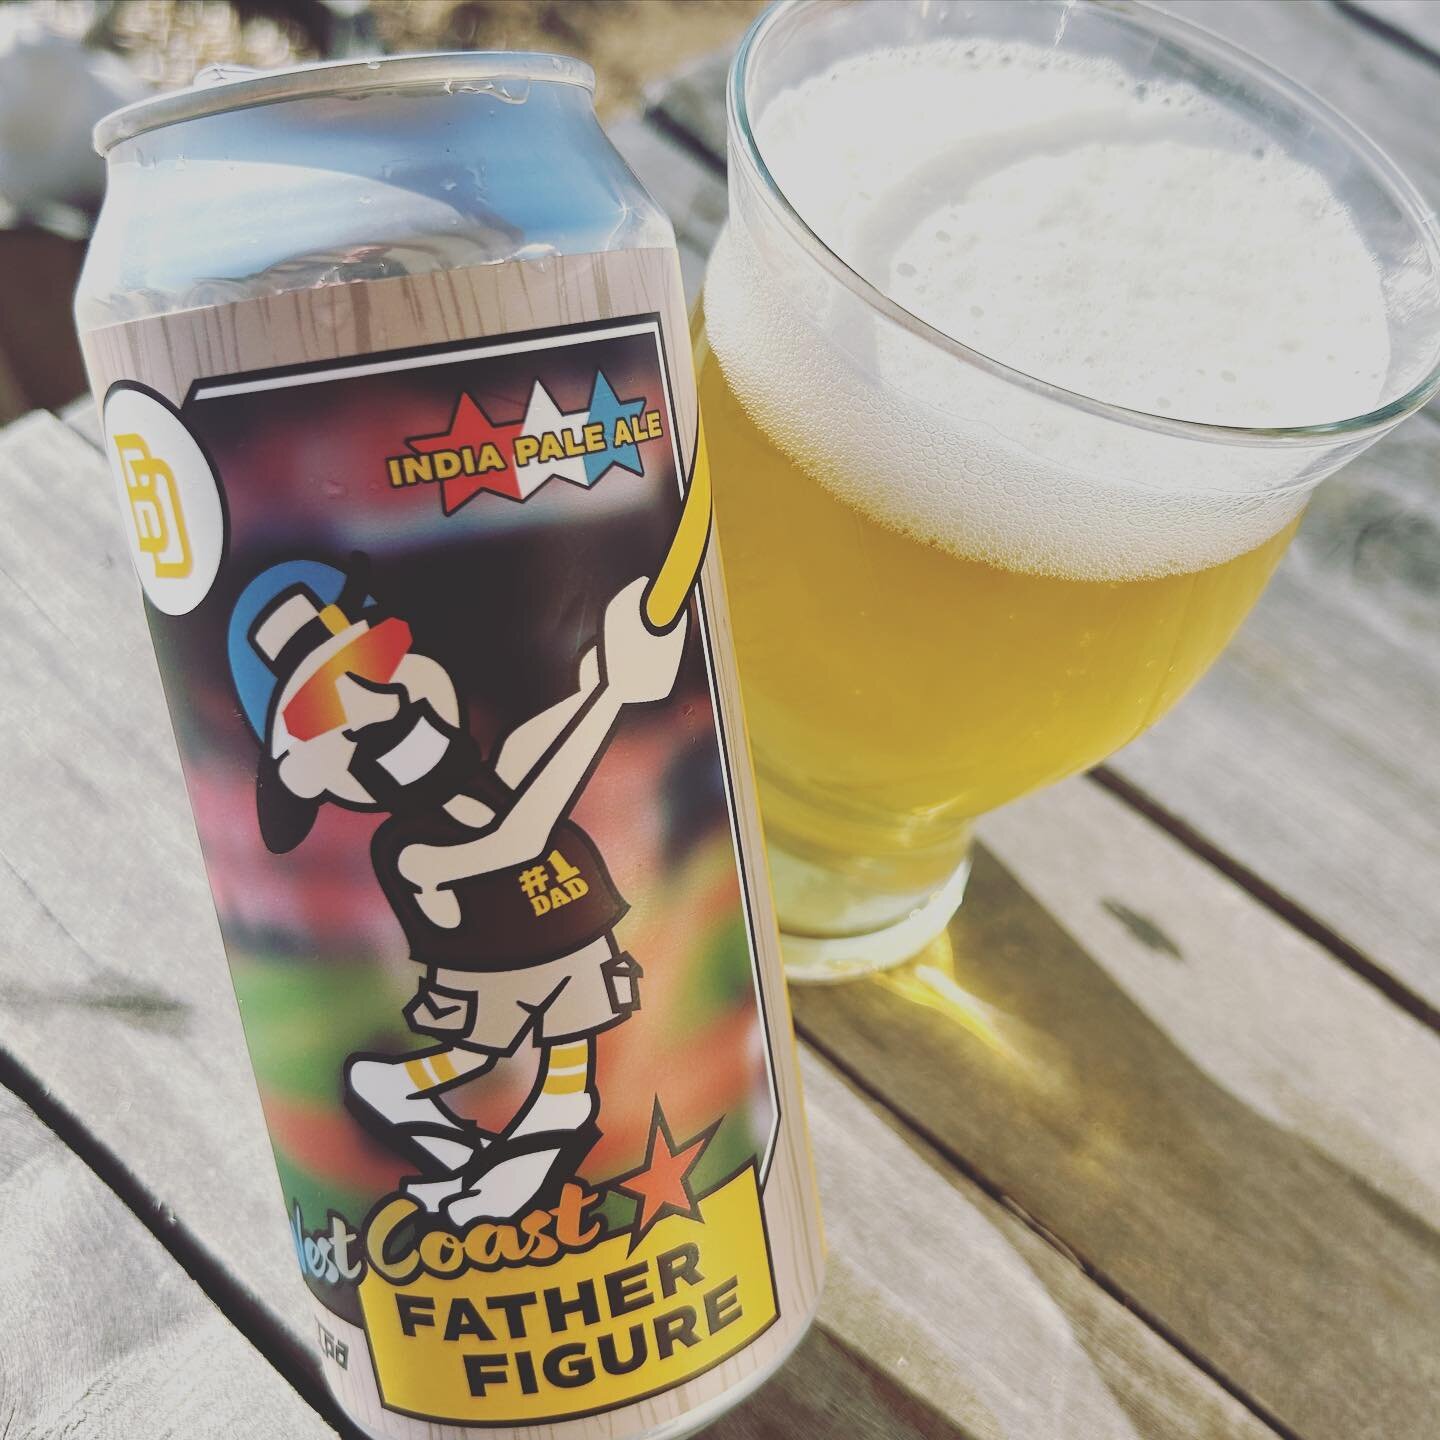 Stoked to get my hands on this @beerdadsbrewworks Father Figure IPA - get your cans at craft beer spots around SoCal 🍻🍻 #monday #fatherfigure